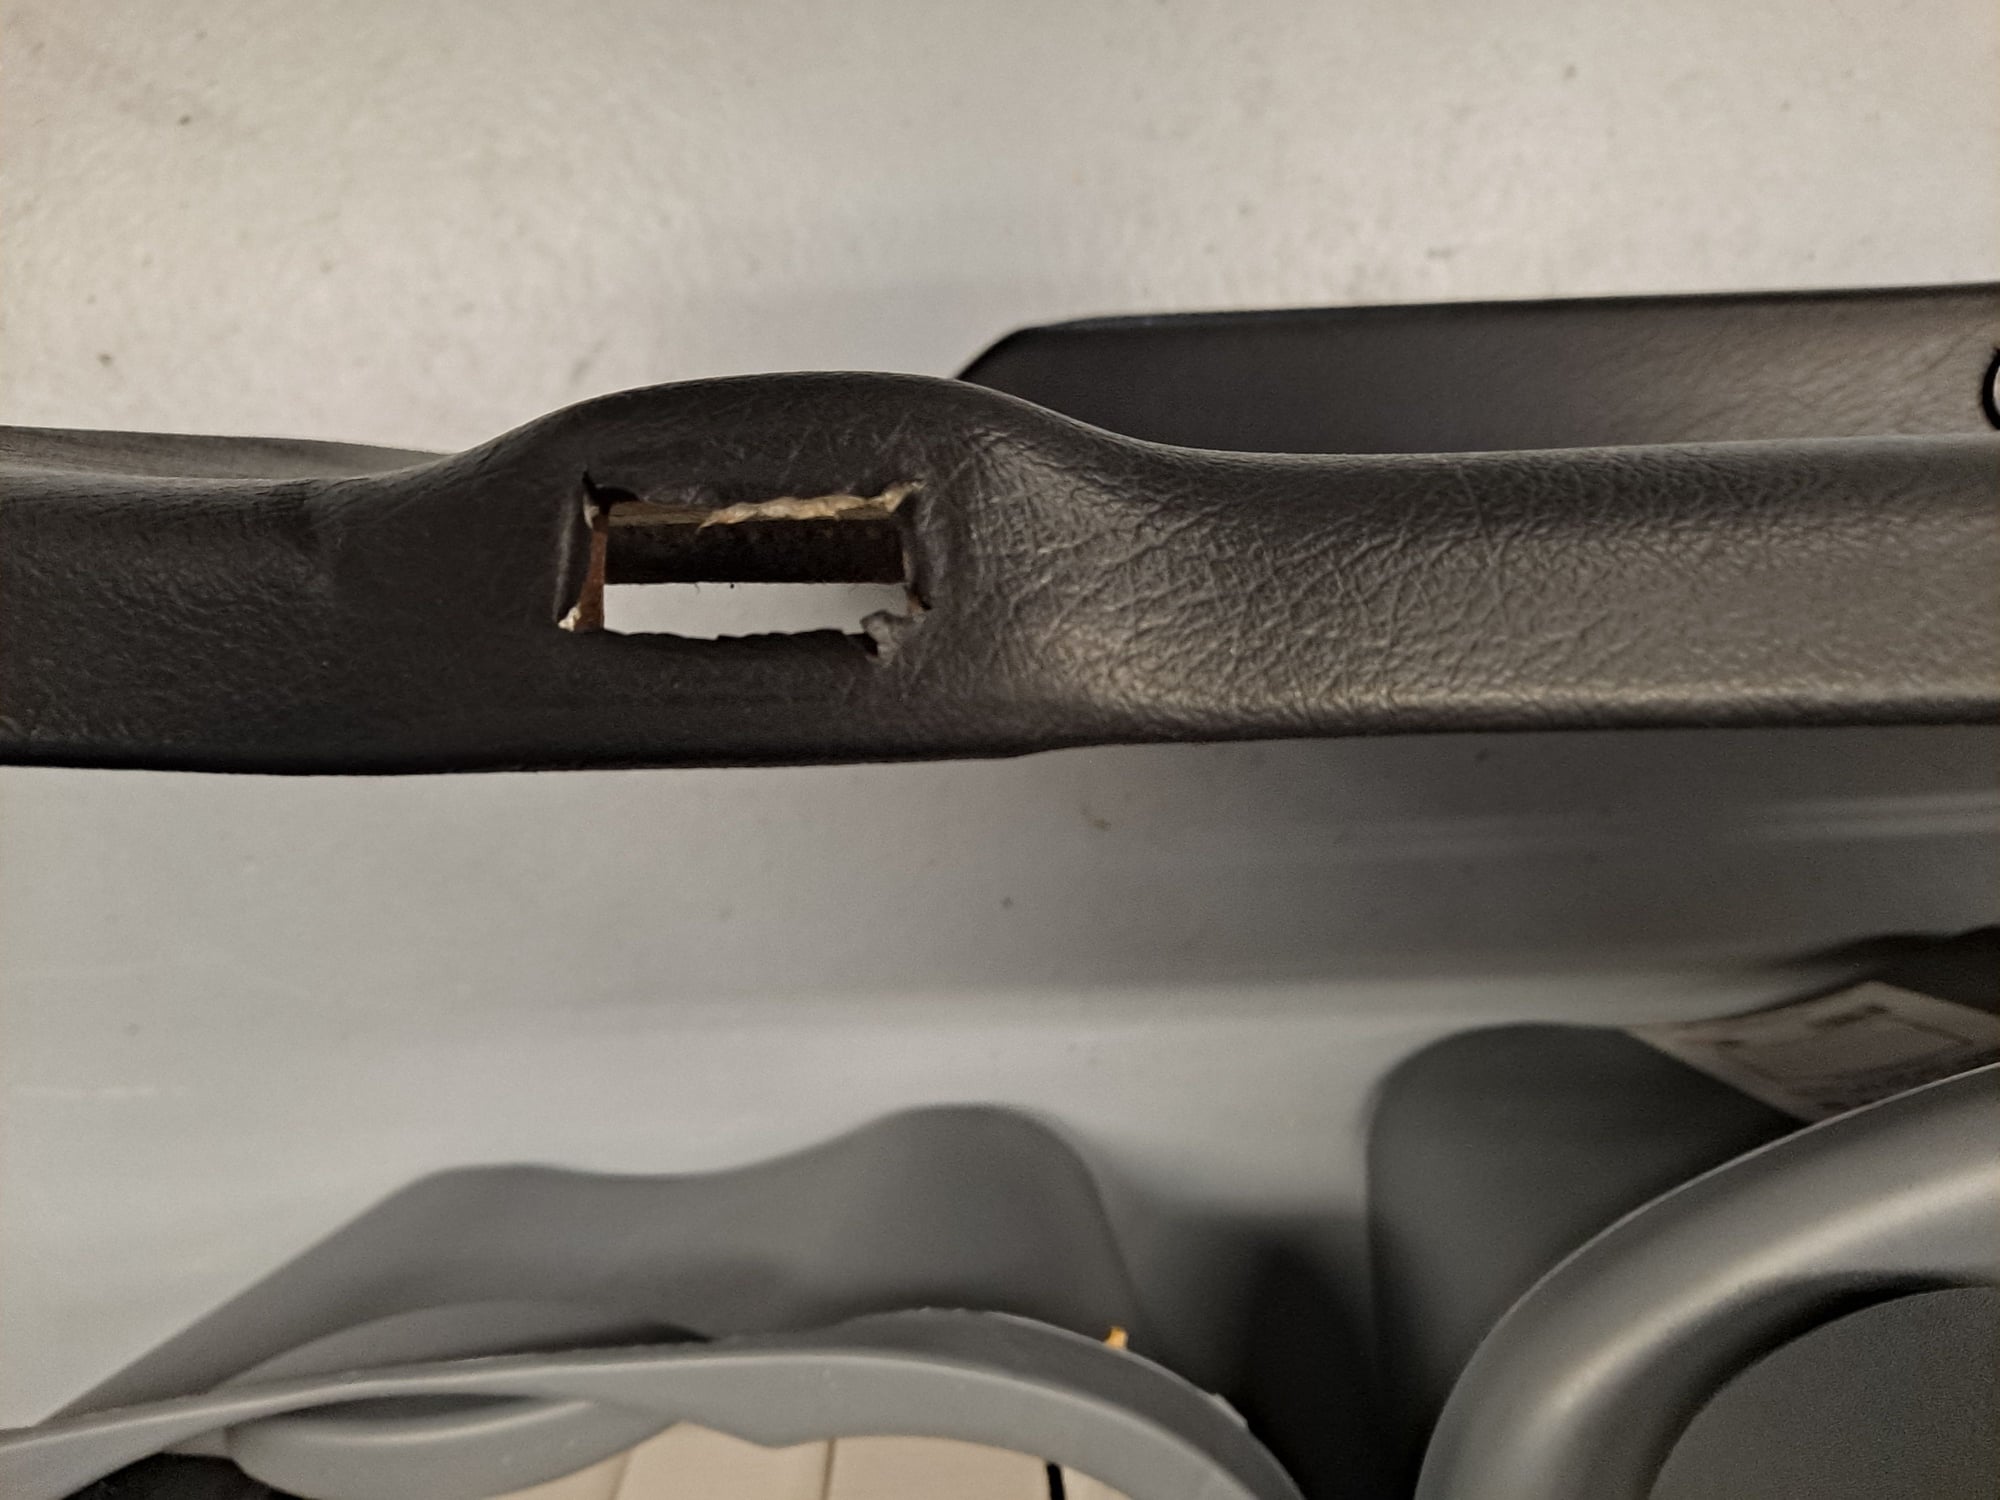 Interior/Upholstery - GSL-SE door cards grey - Used - 1979 to 1985 Mazda RX-7 - Liberty, MO 64068, United States